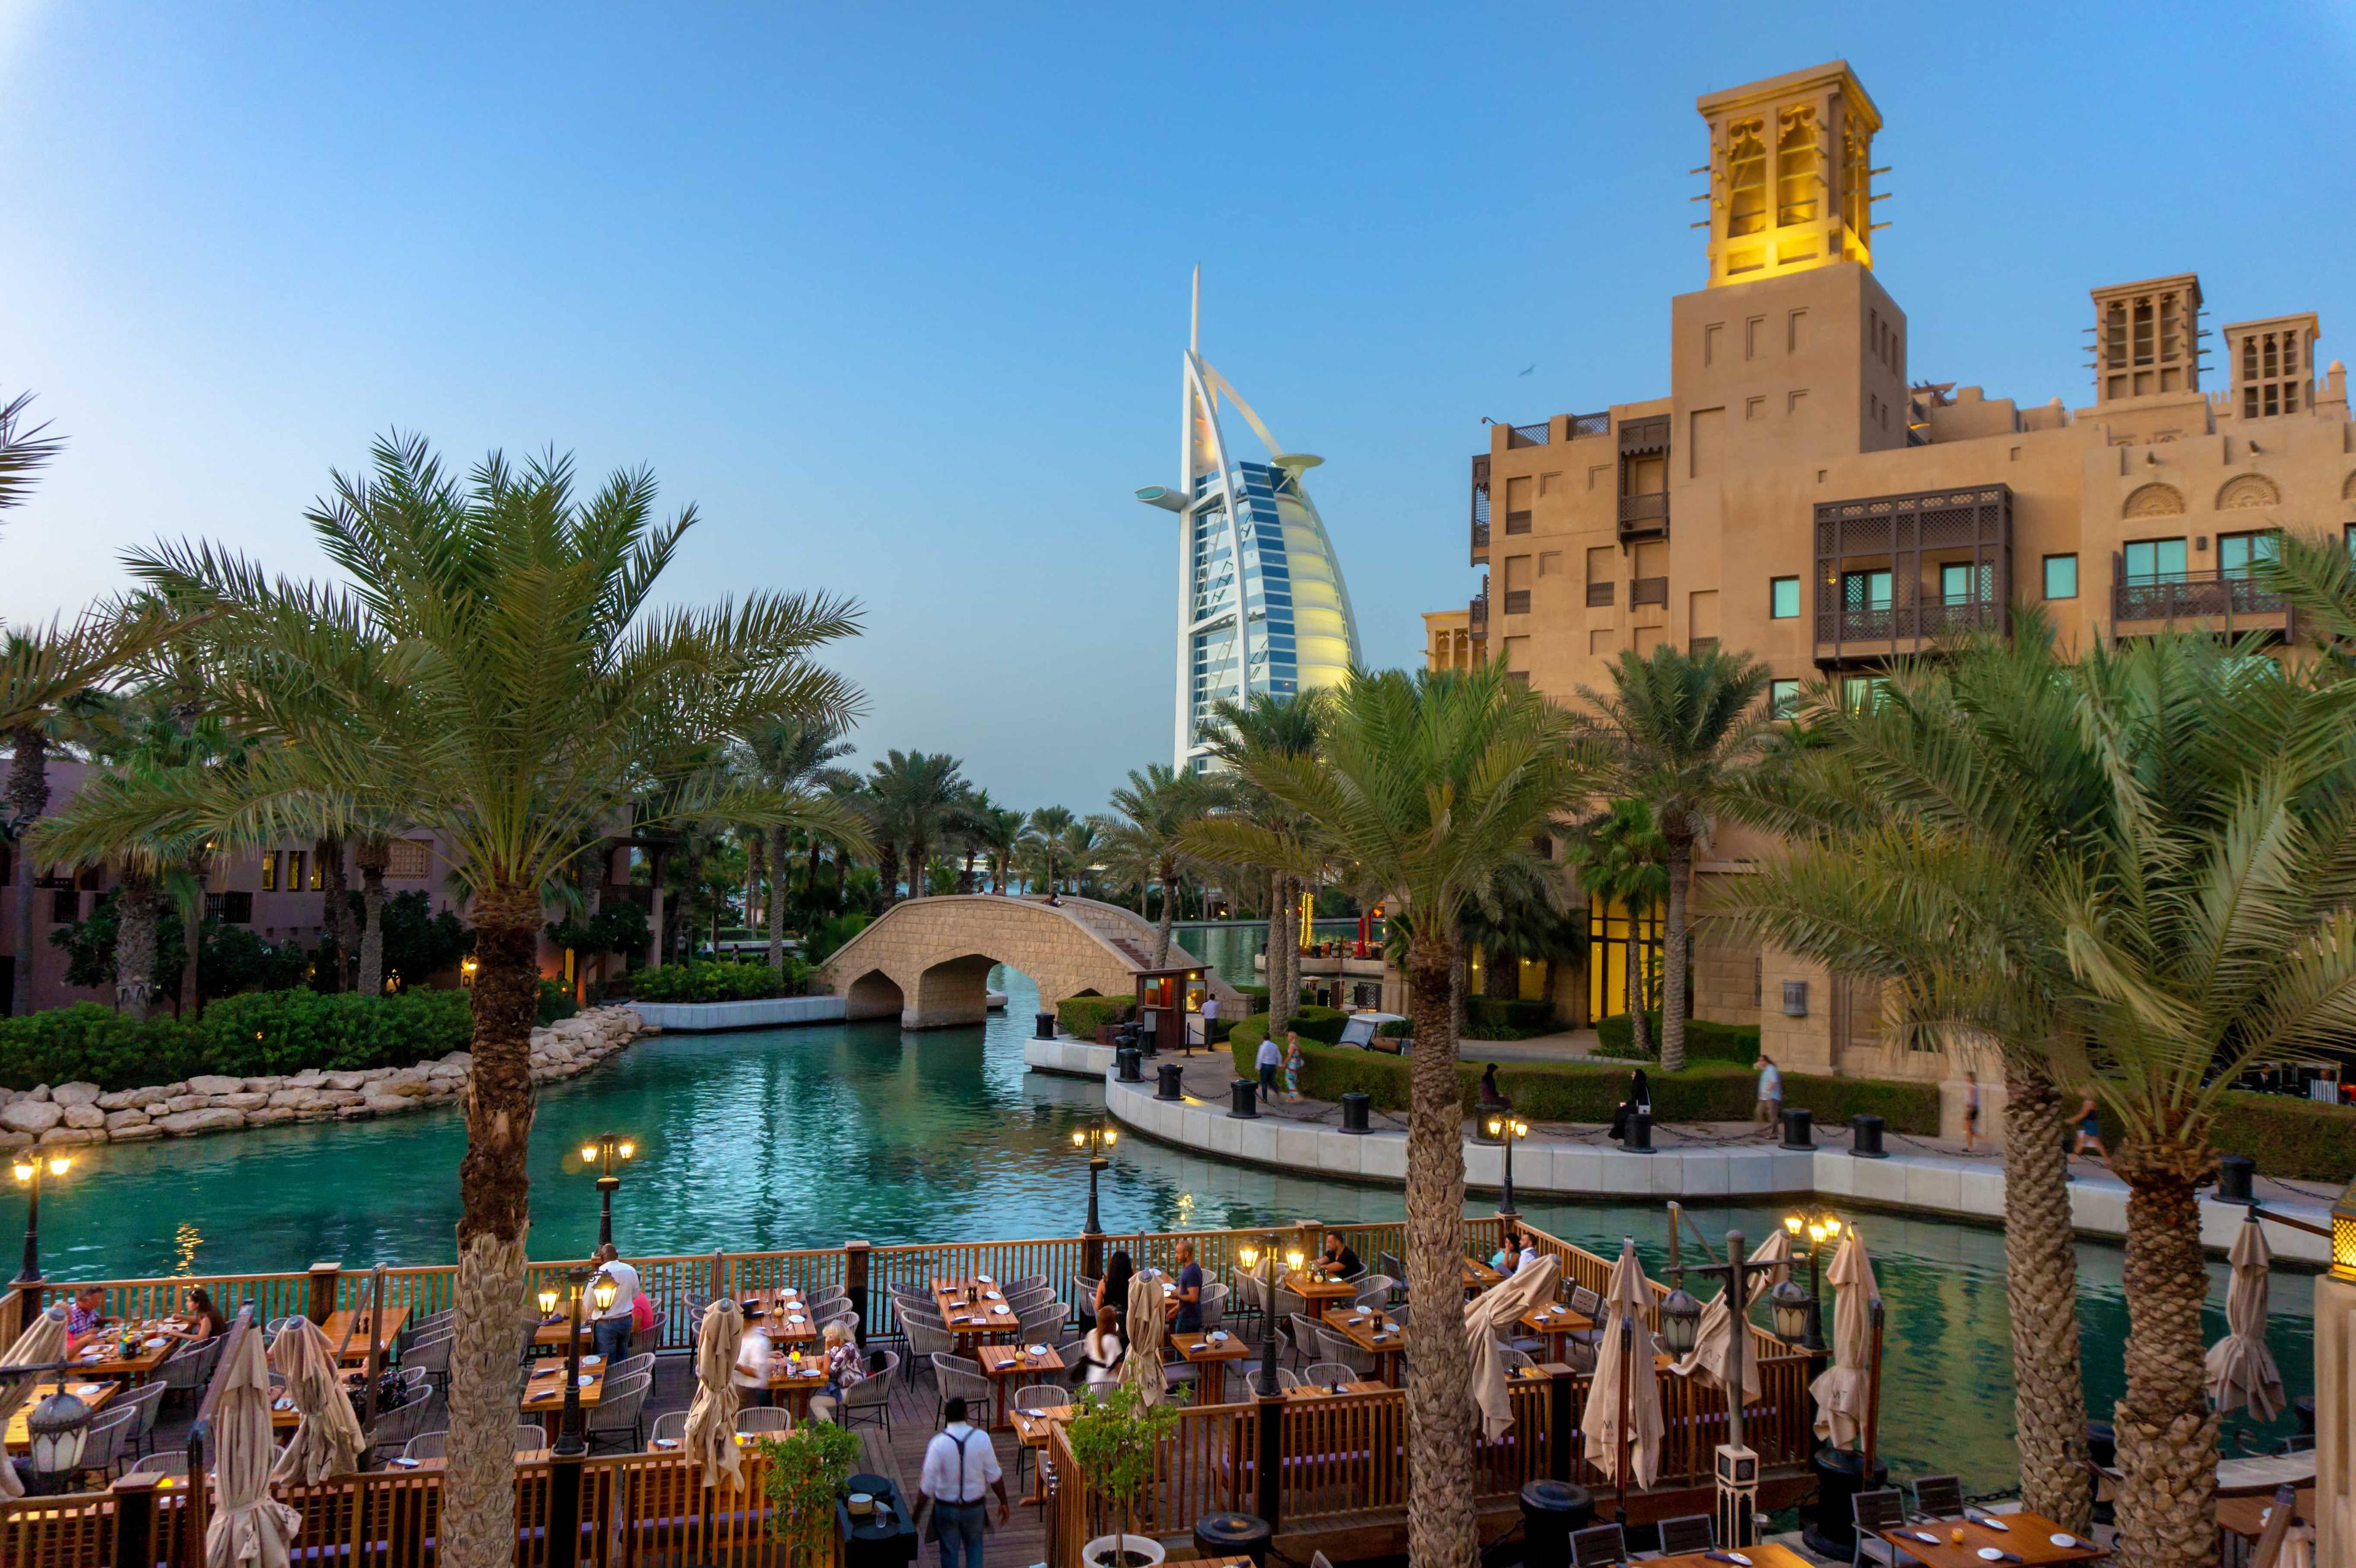 RAMADAN OUTDOOR DINING AND HUBBLY BUBBLY SERVICES BANNED DURING FASTING HOURS IN DUBAI